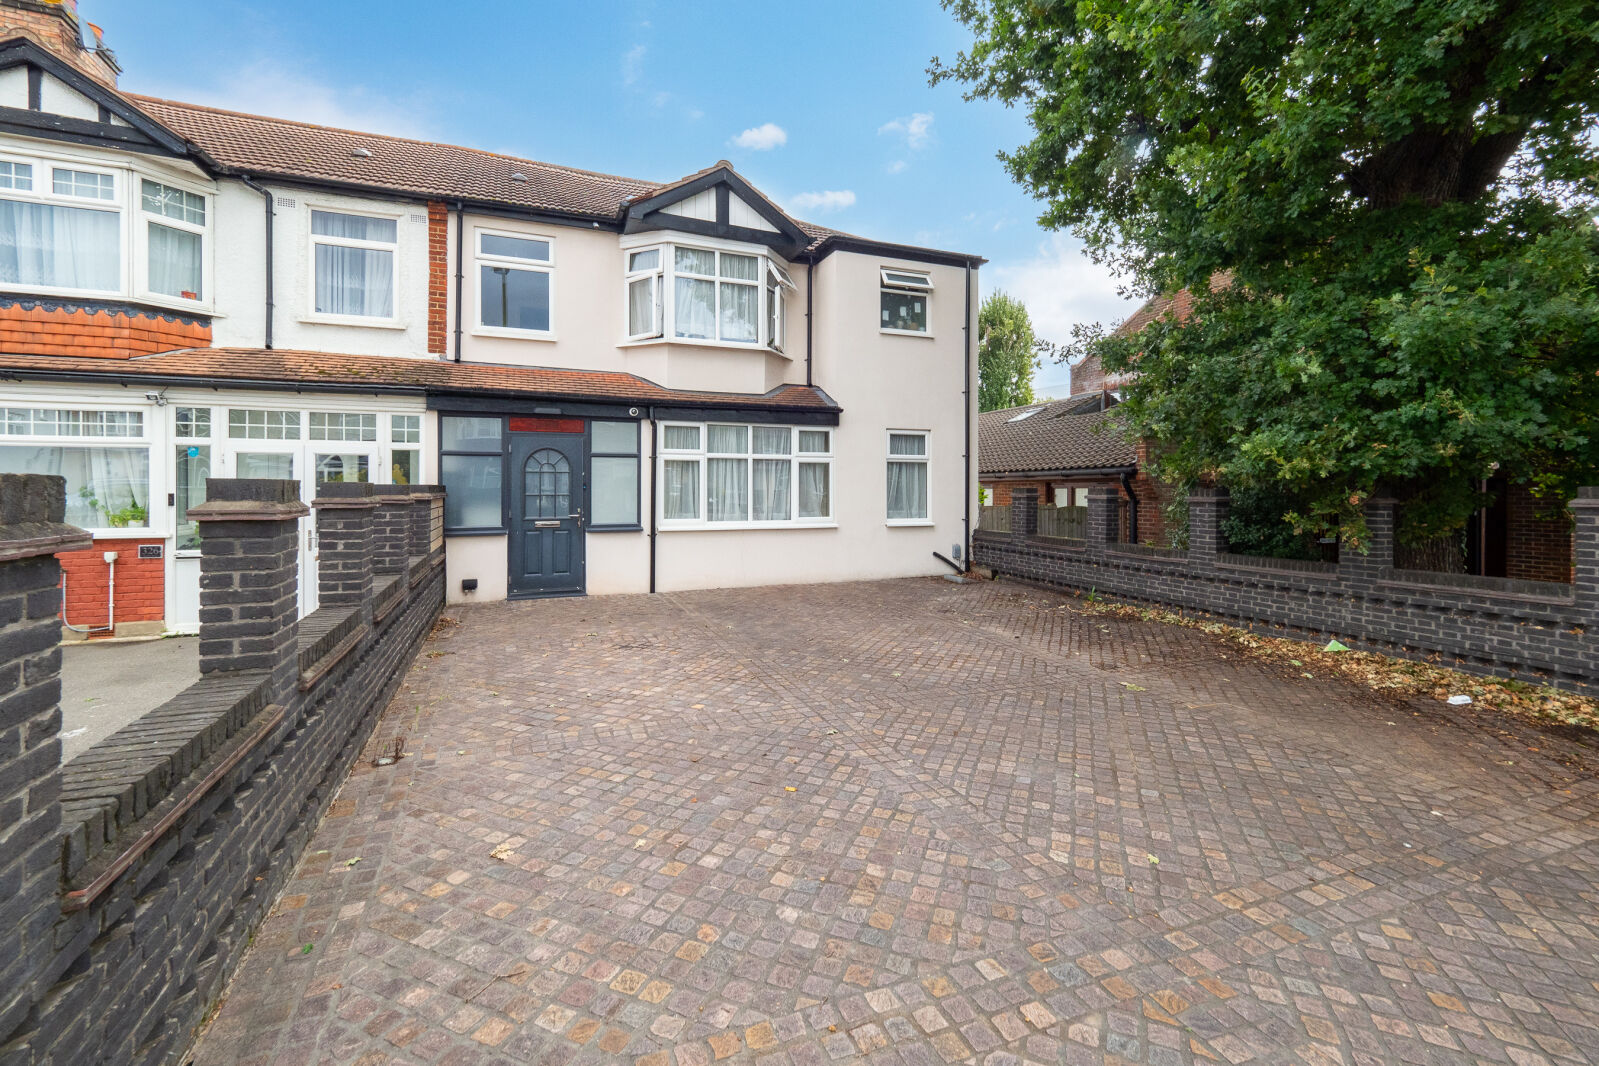 4 bedroom semi detached house for sale Malden Road, Cheam, SM3, main image